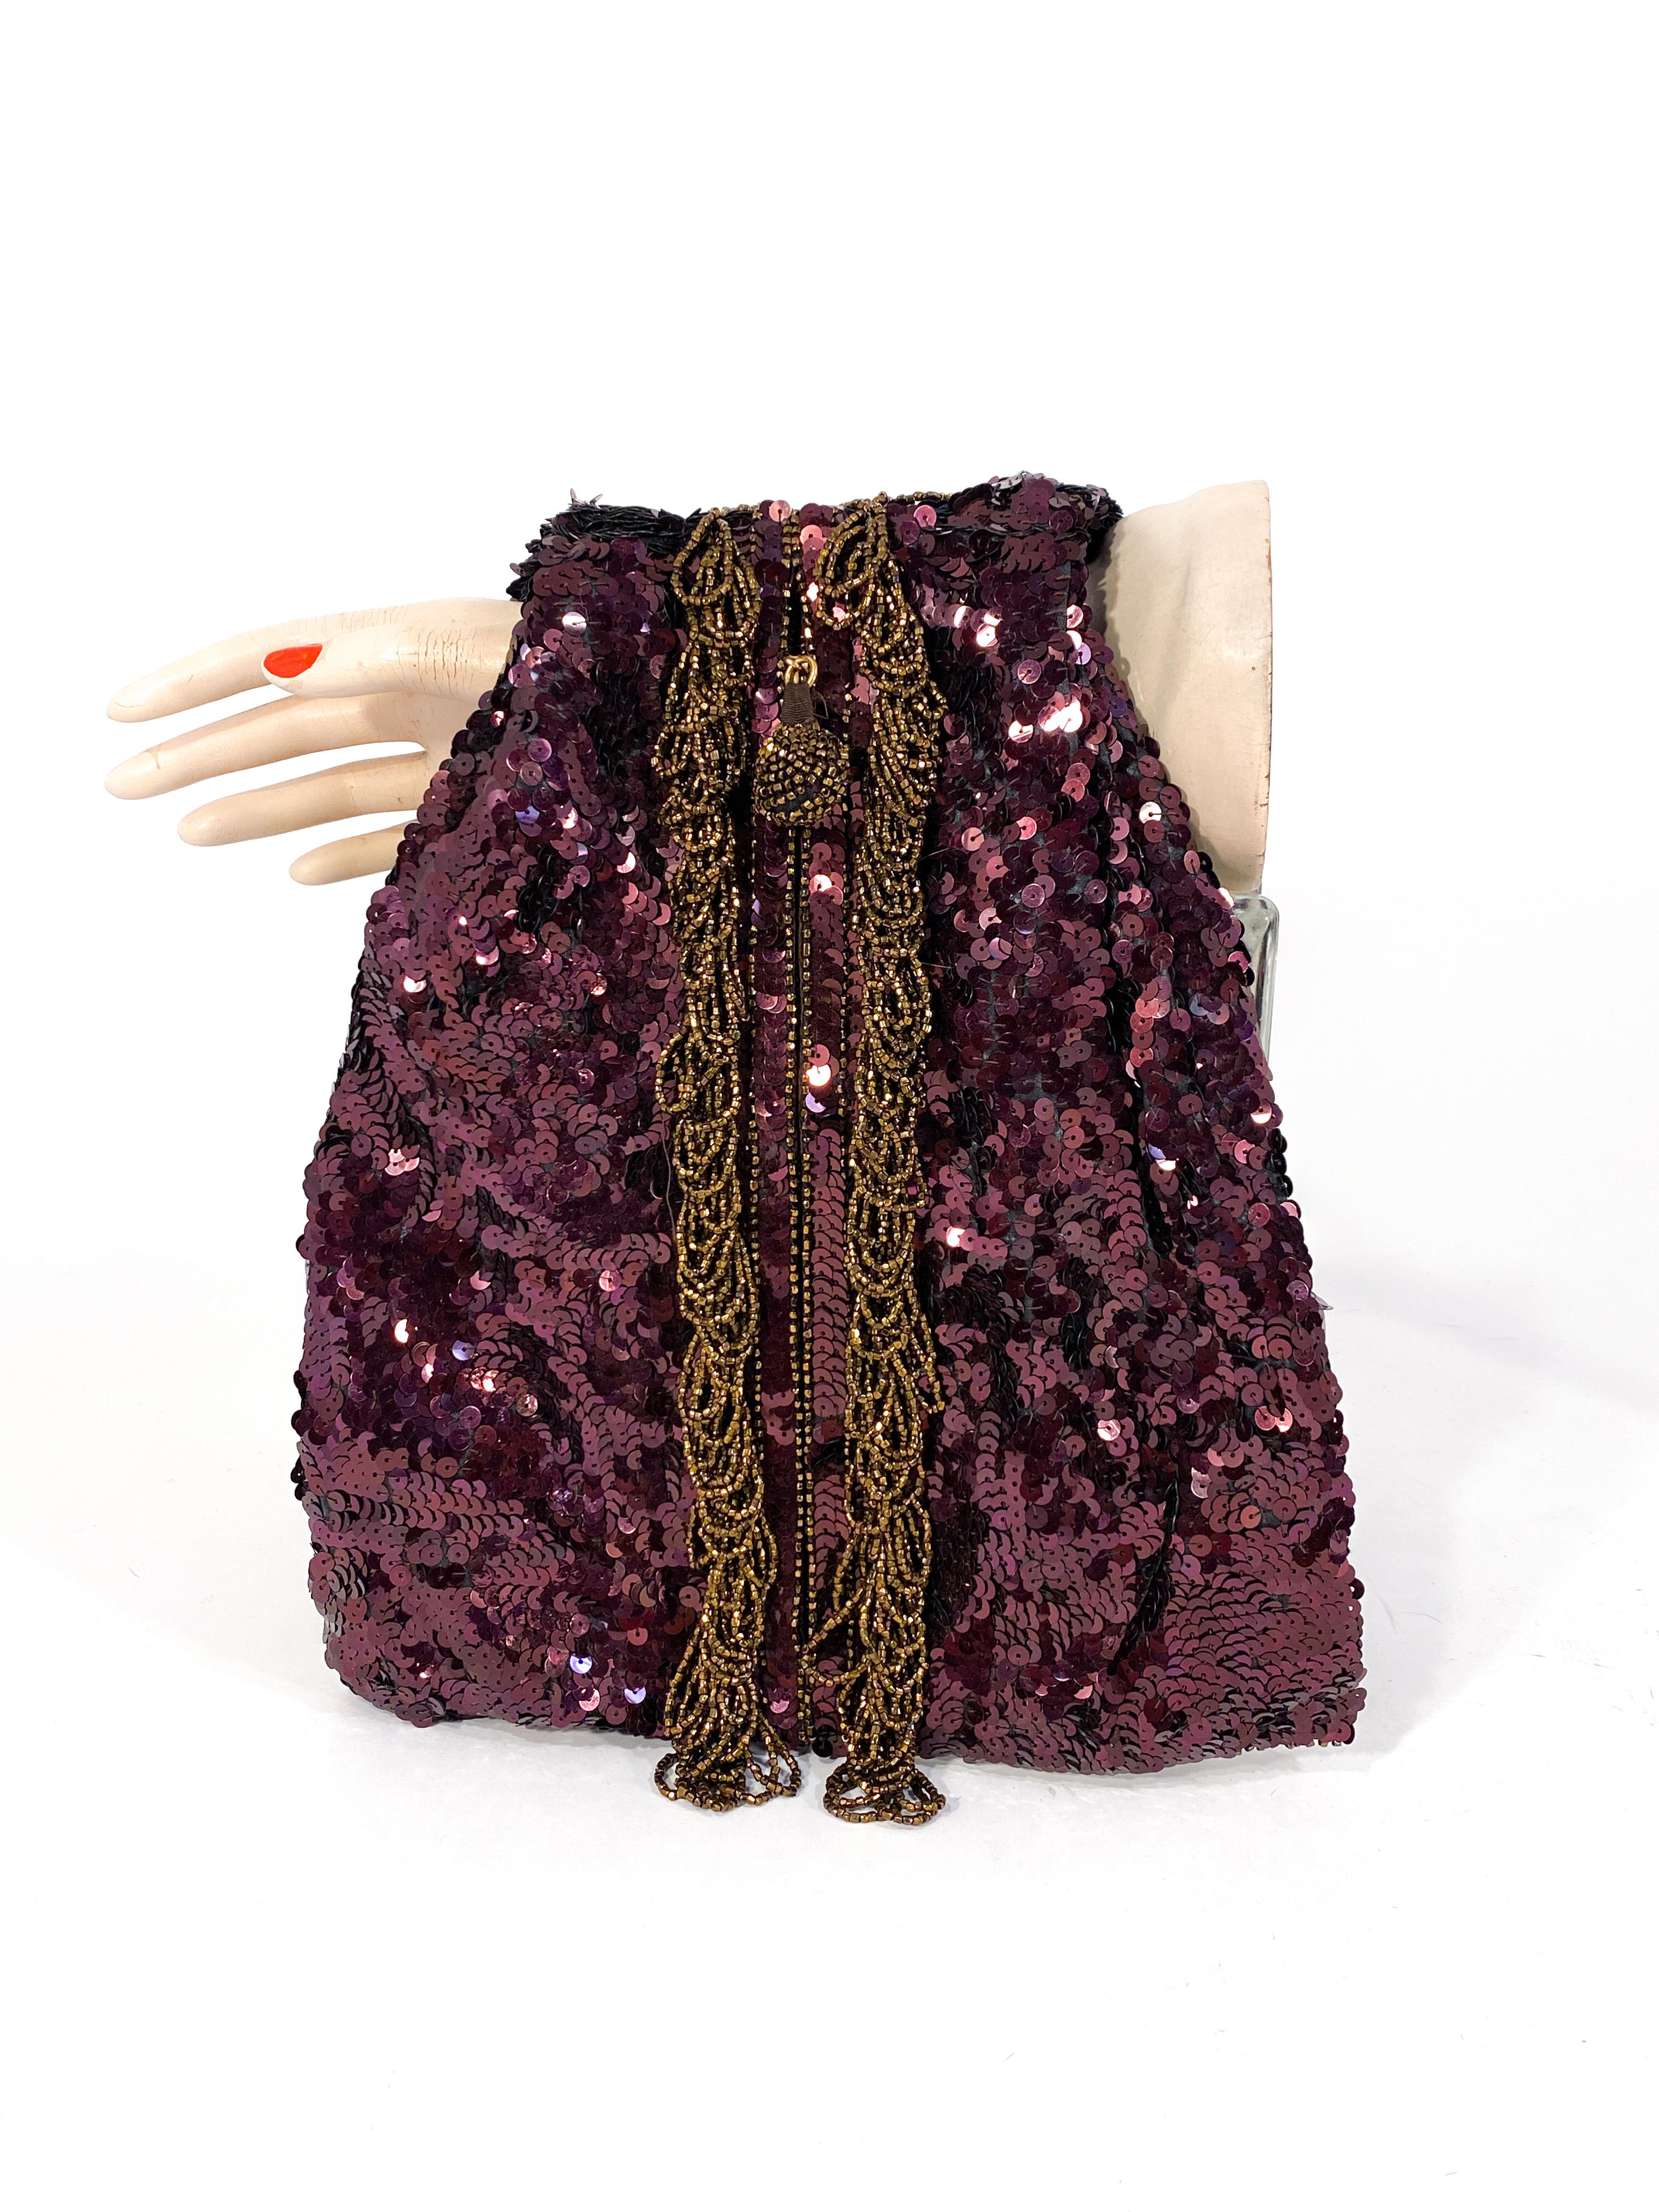 1940s Koret rare maroon handbag sold at Neiman Marcus. The bag is structured two be worn on the arm used for dancing in night clubs. The body of the bag is entirely decorated with brilliant maroon sequin with a strip of copper beaded loops to match